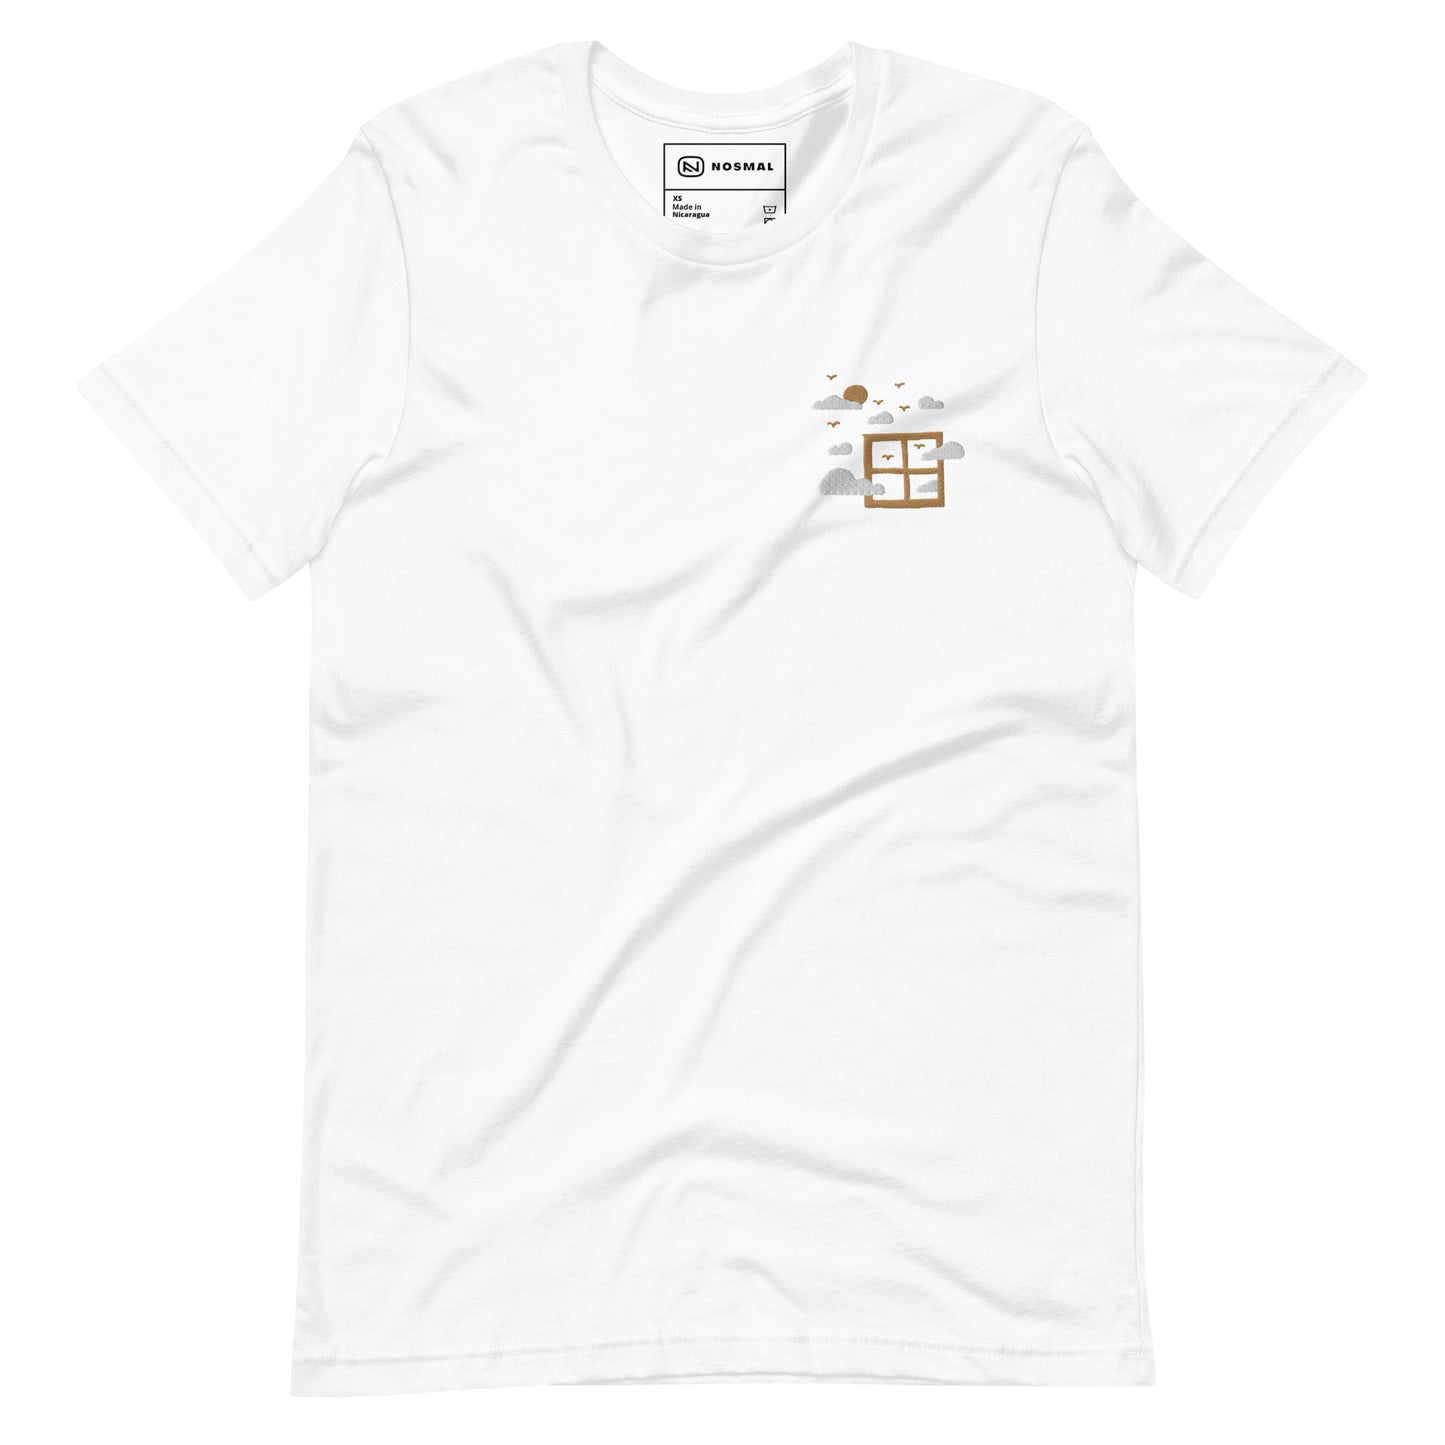 Straight on view of fresh air embroidered design on white unisex t-shirt.